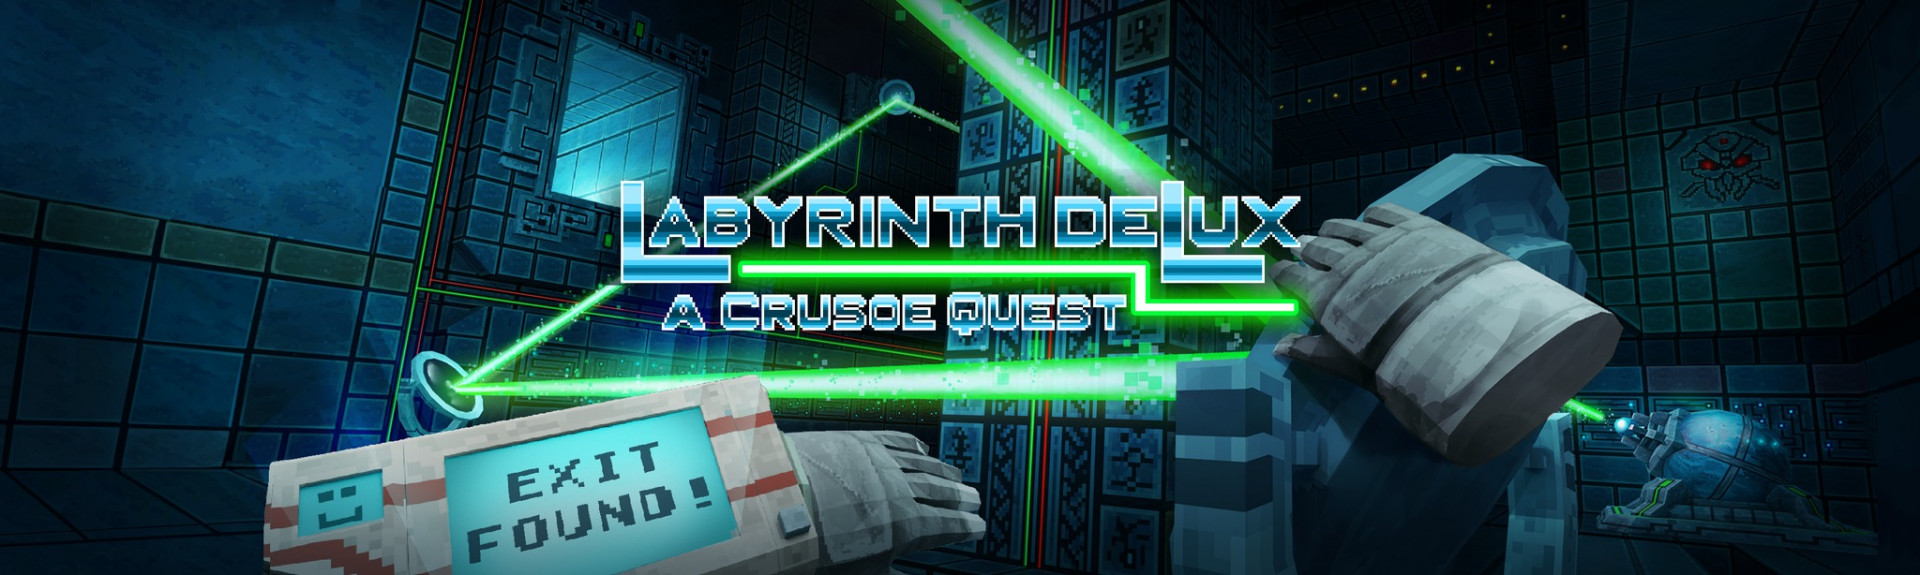 Labyrinth deLux - A Crusoe Quest